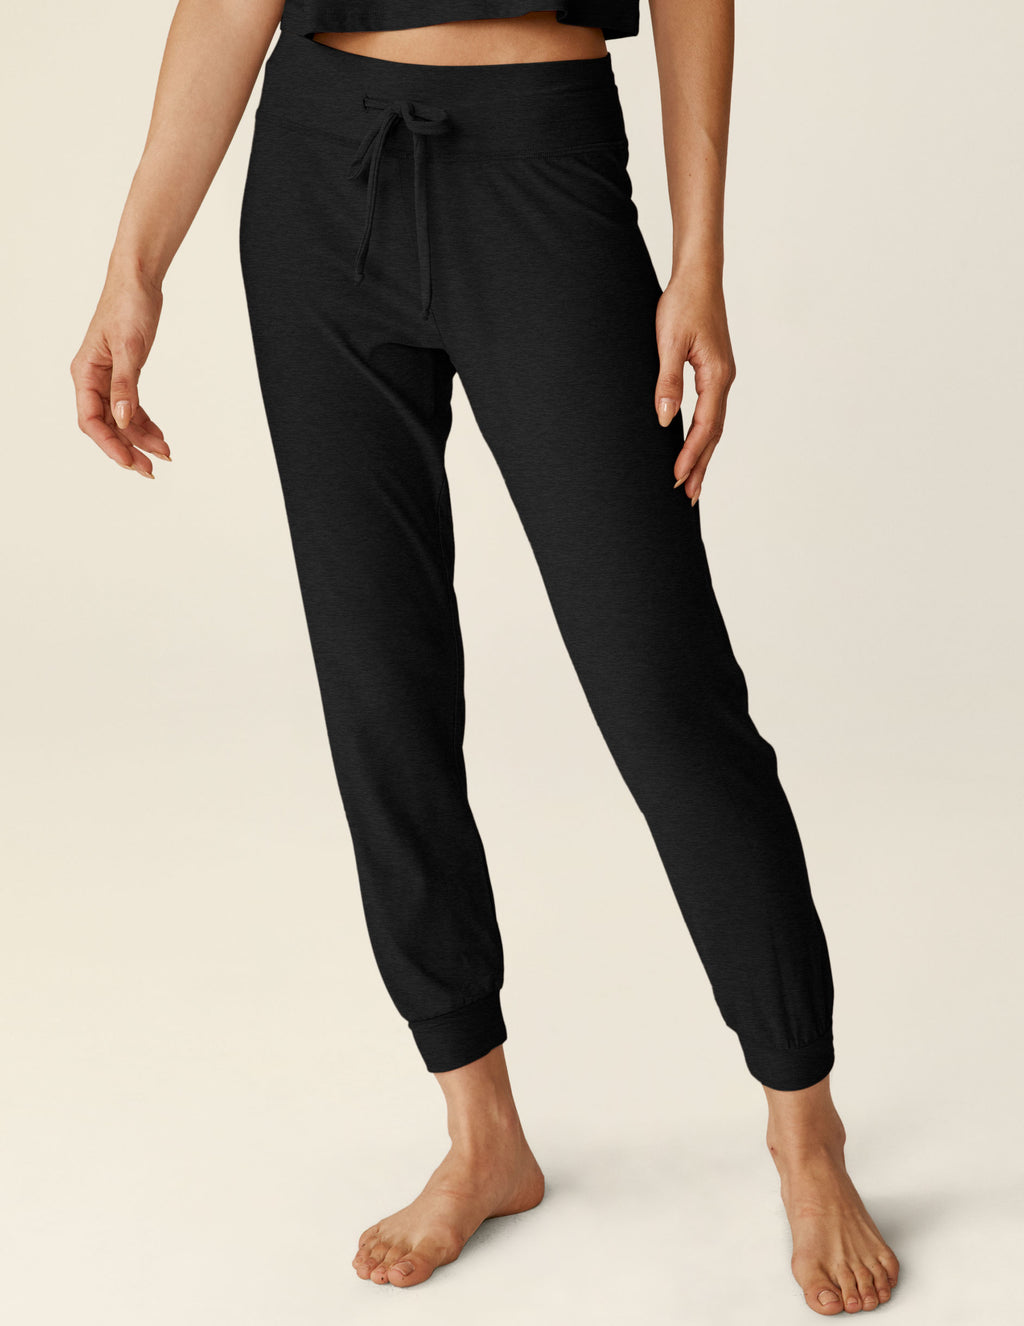  QGGQDD Joggers for Women - Sweatpants with Pockets Yoga Lounge  Black Workout Pants : Sports & Outdoors